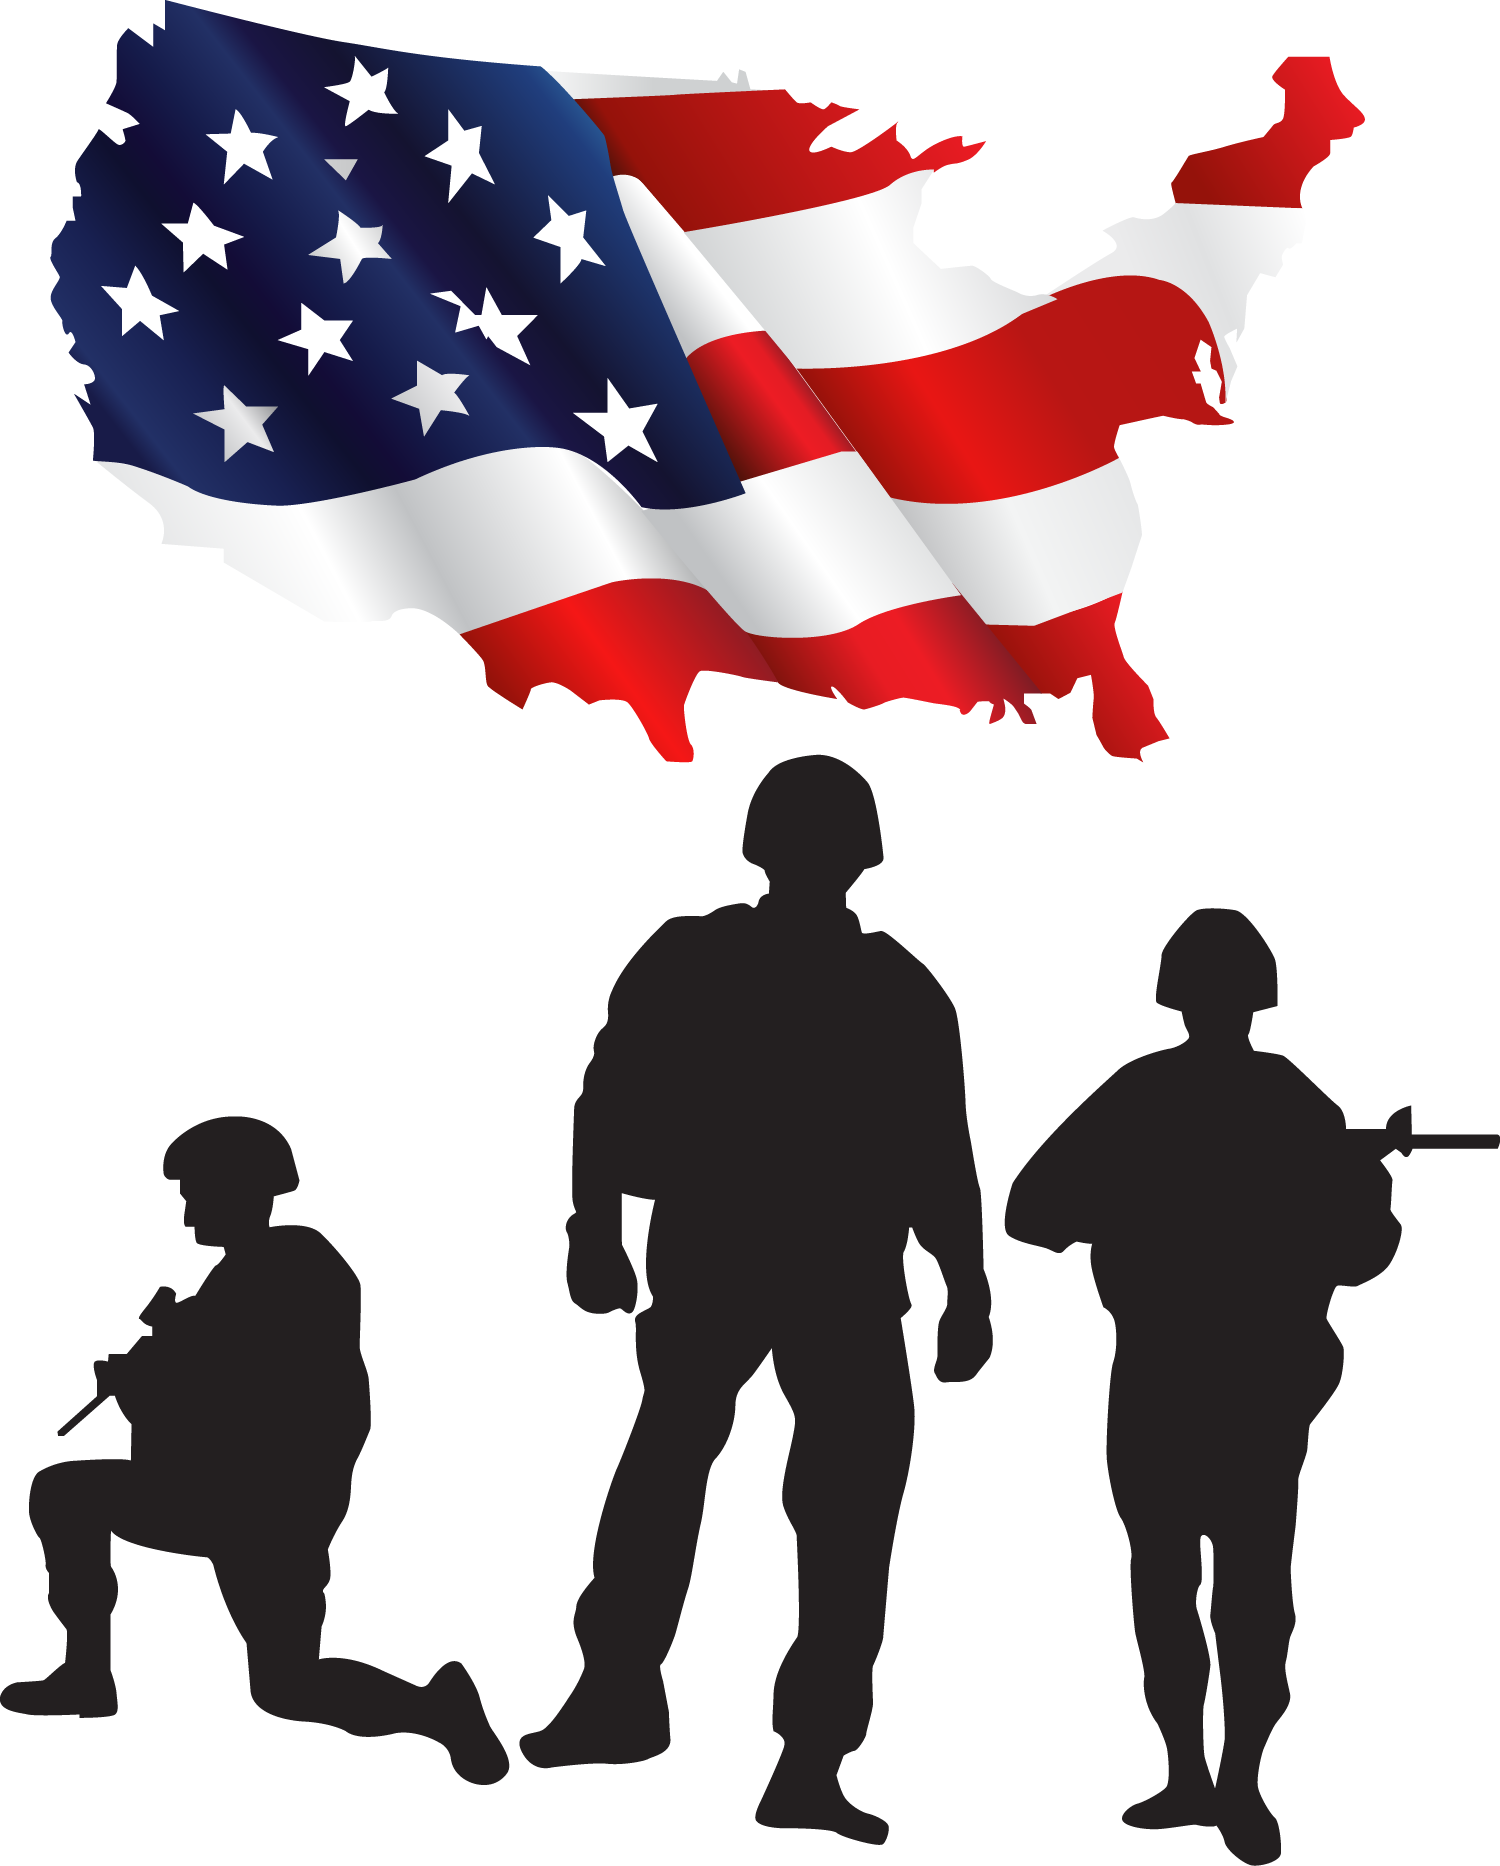 United States Soldier Salute Clip art  American soldiers